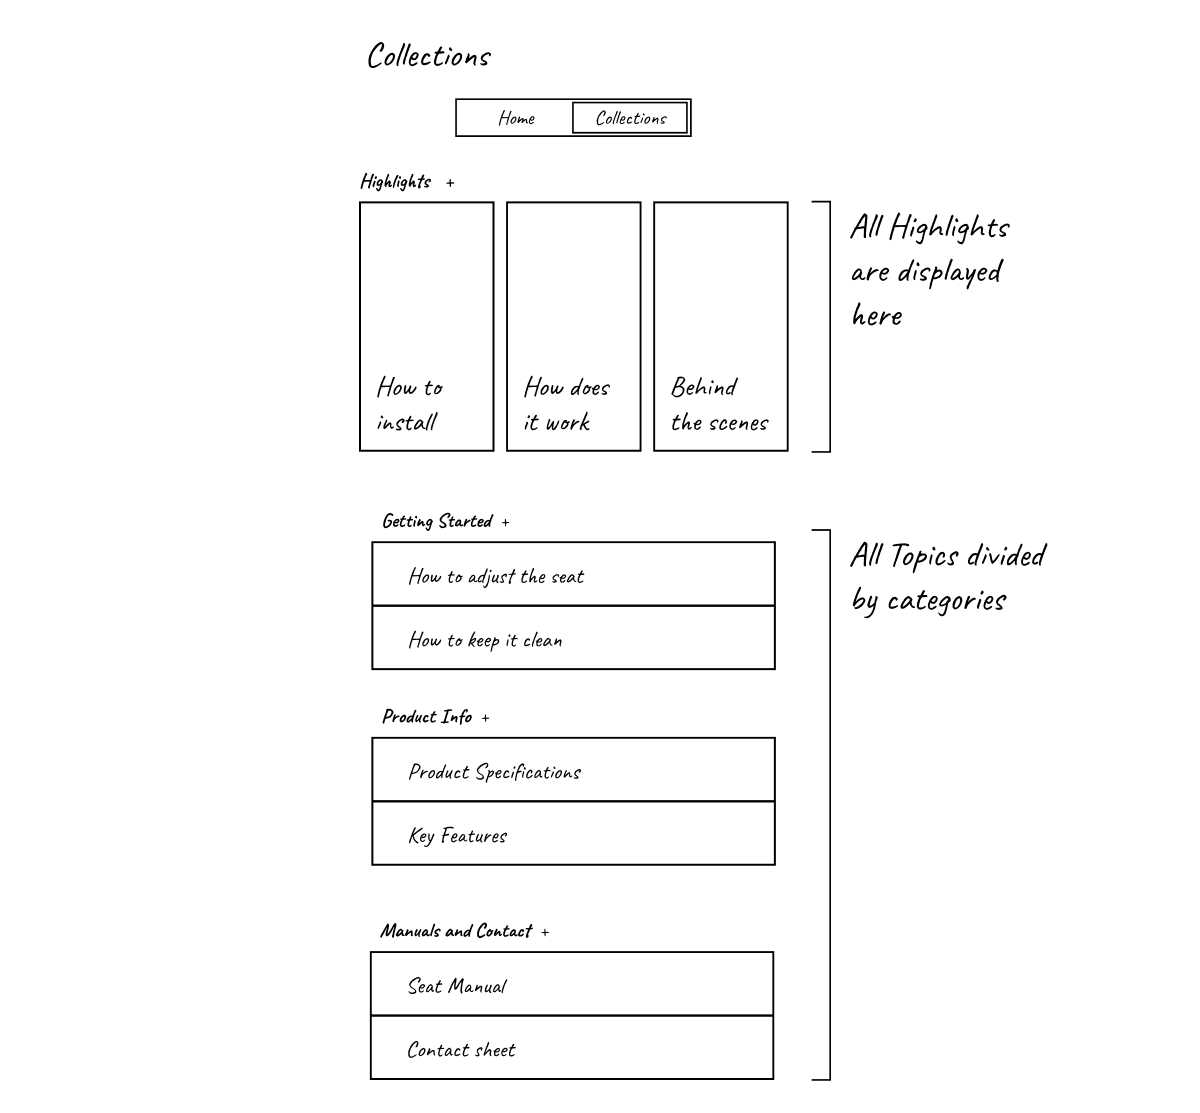 COllection wireframe